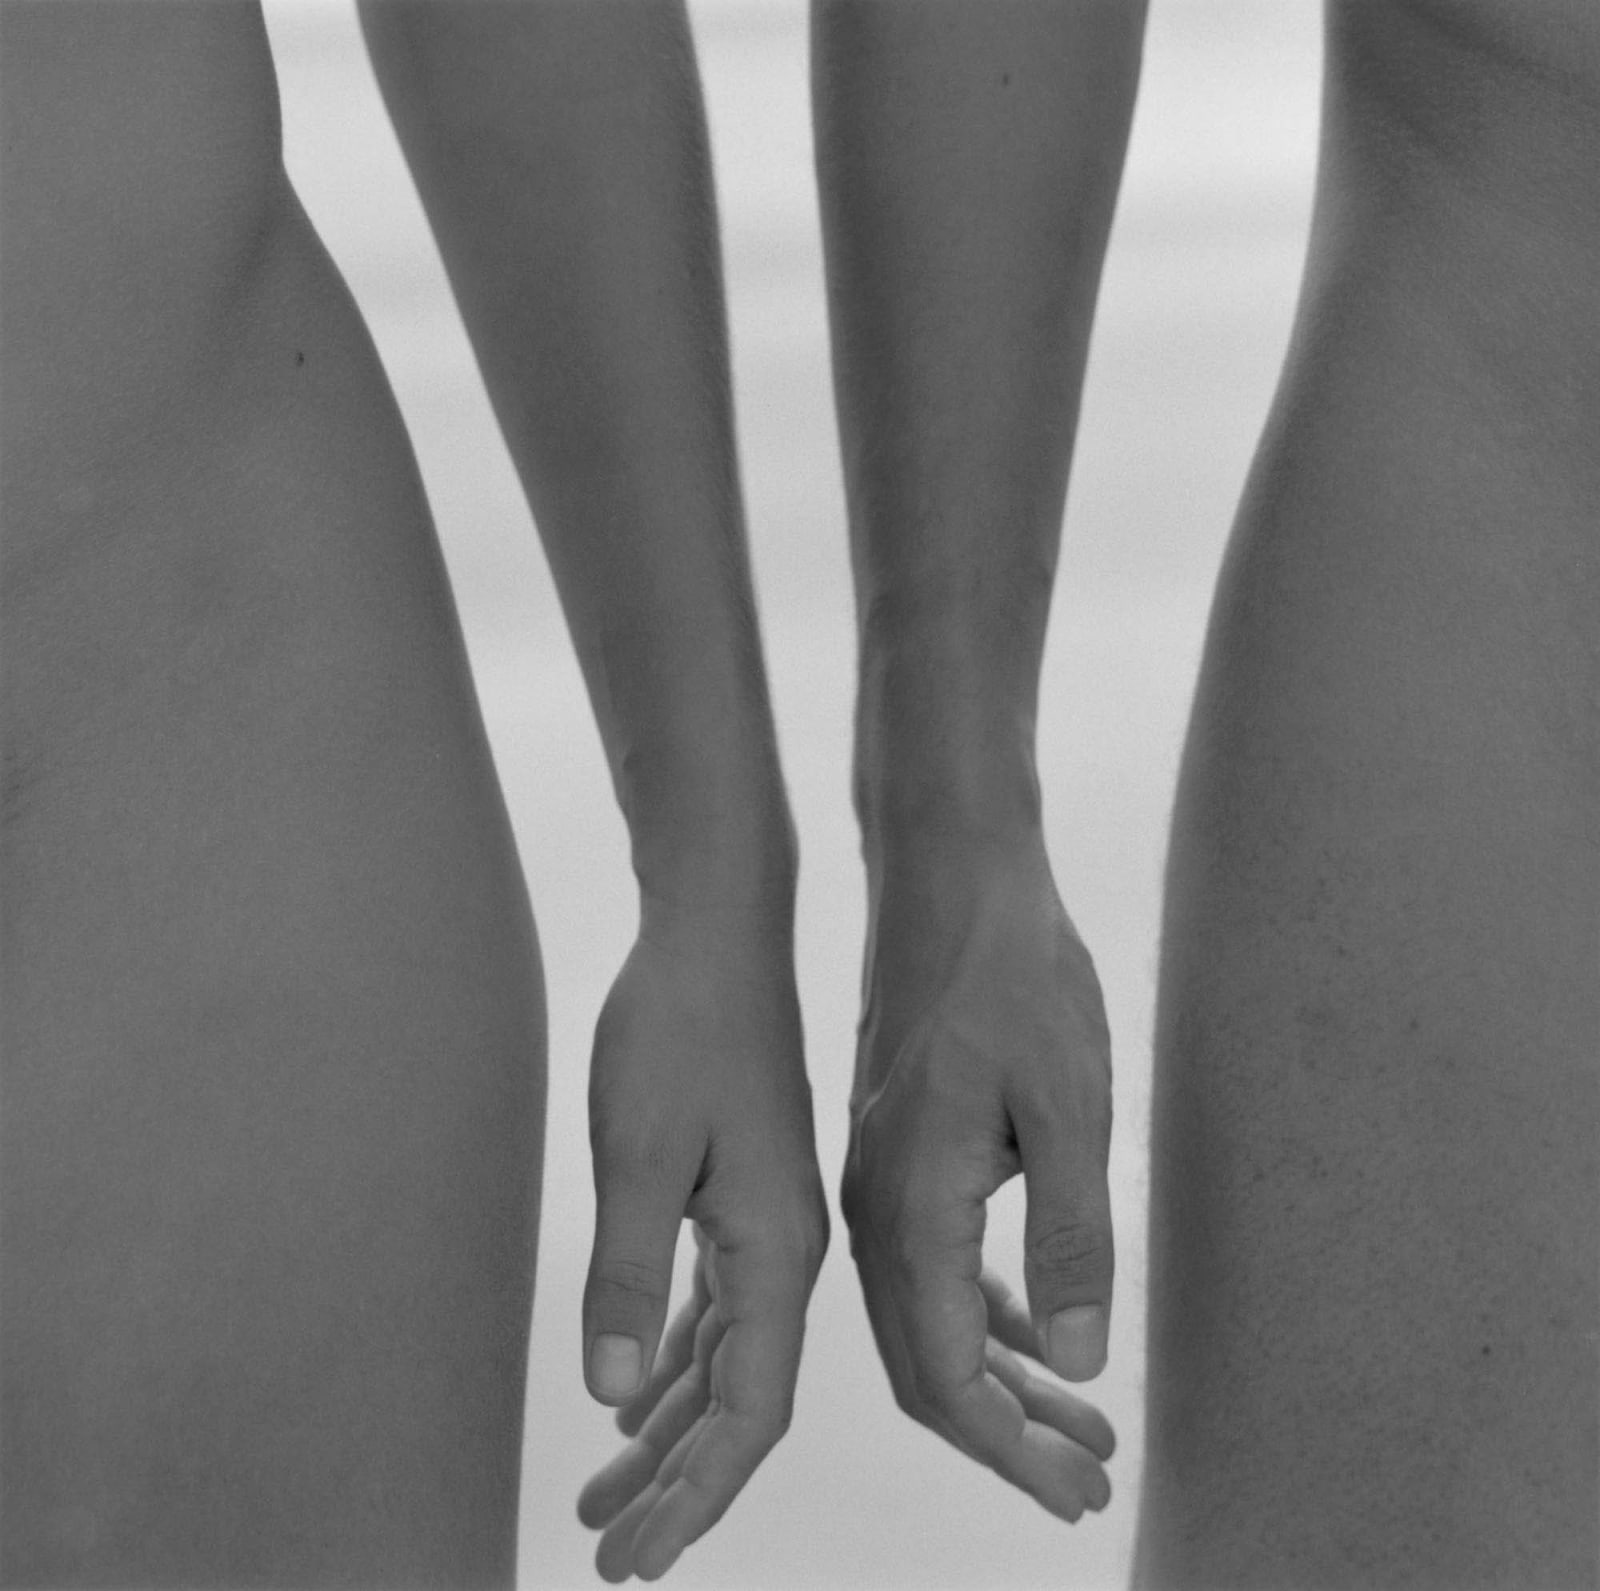 Mona Kuhn photograph of two arms and hands almost touching, framed by two hips